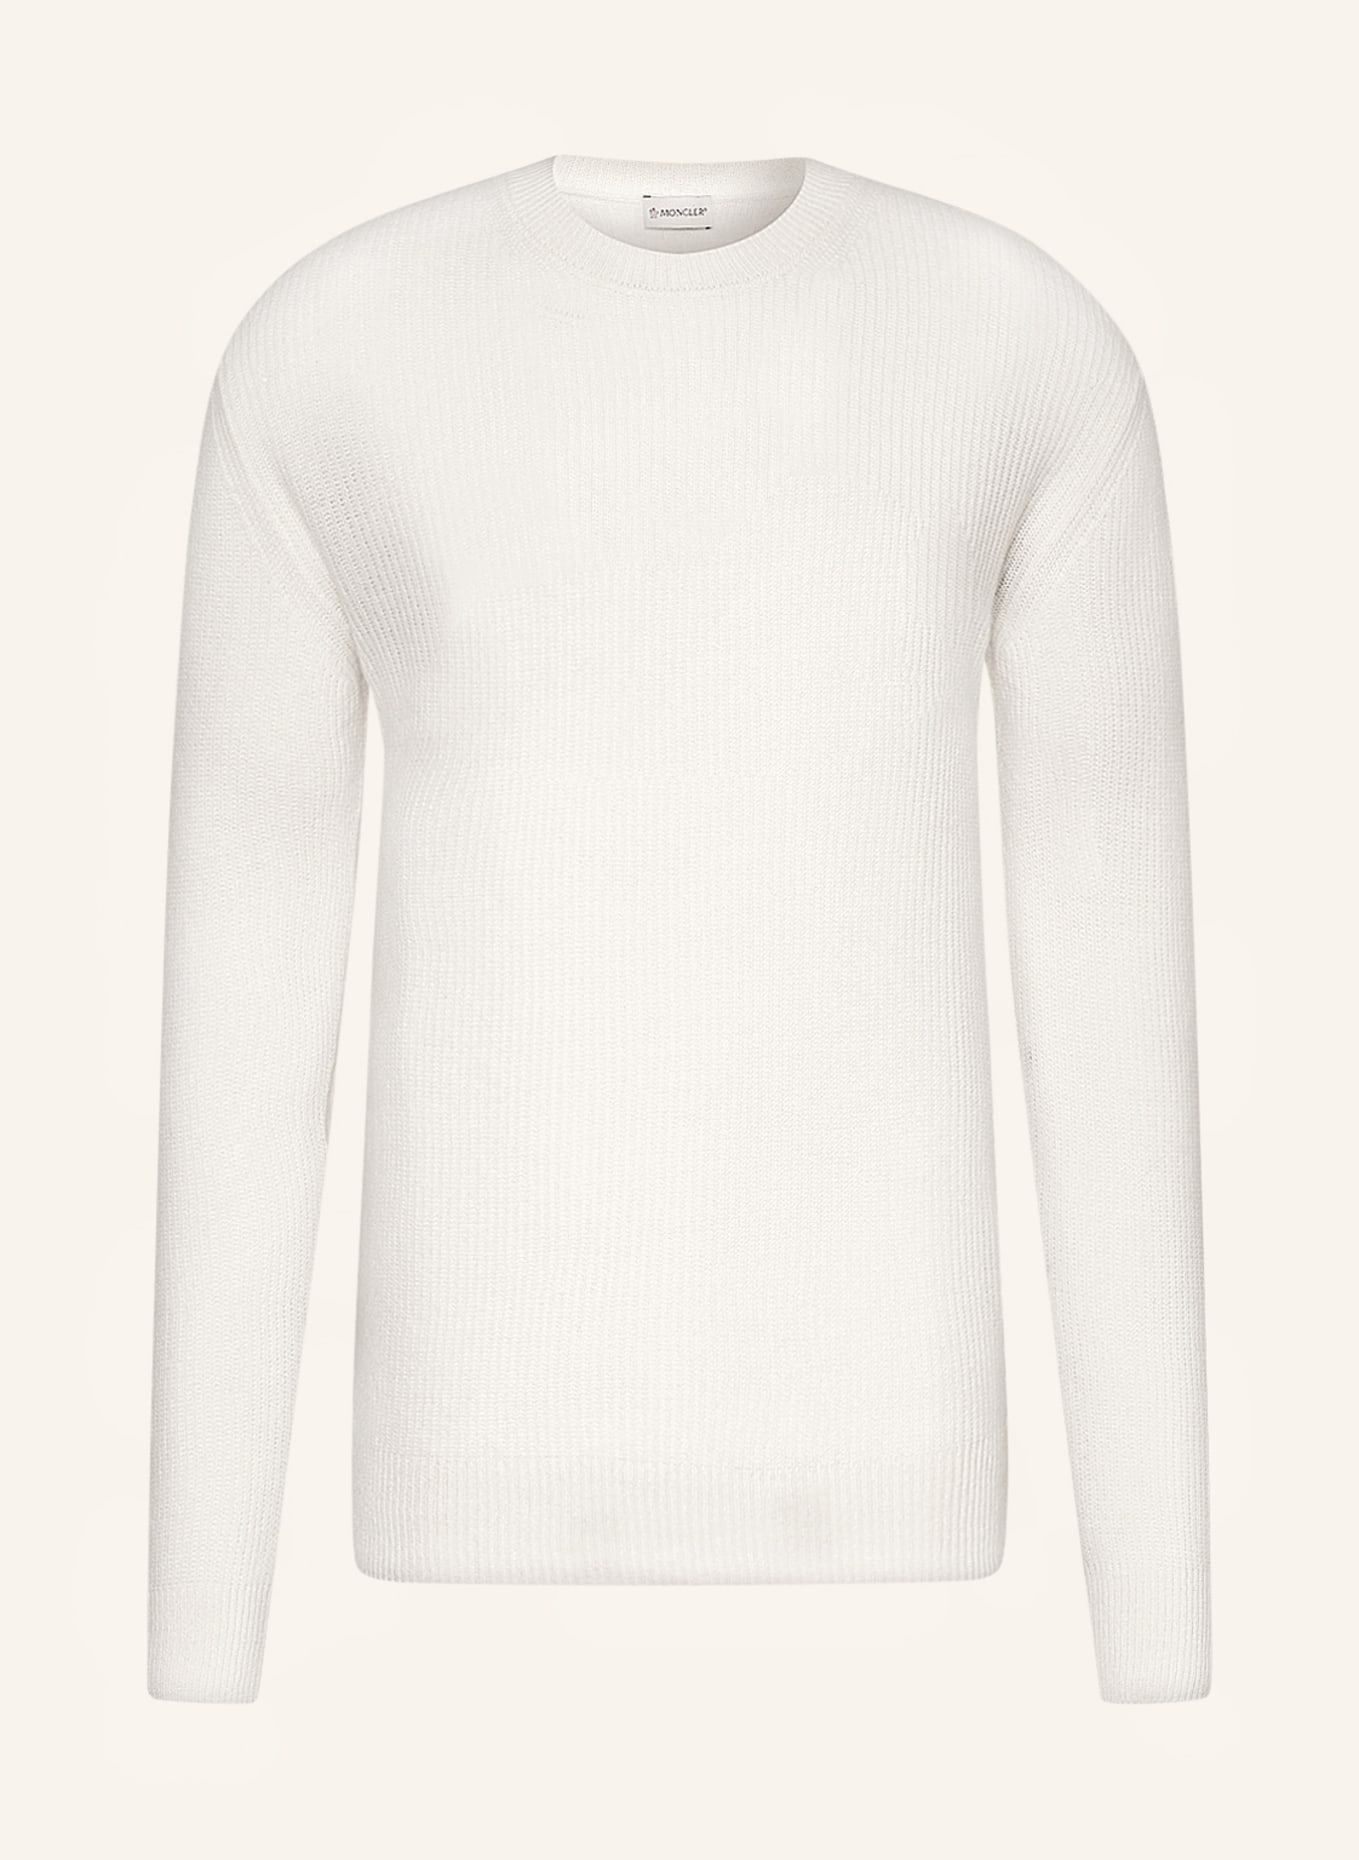 MONCLER Pullover , Farbe: WEISS (Bild 1)